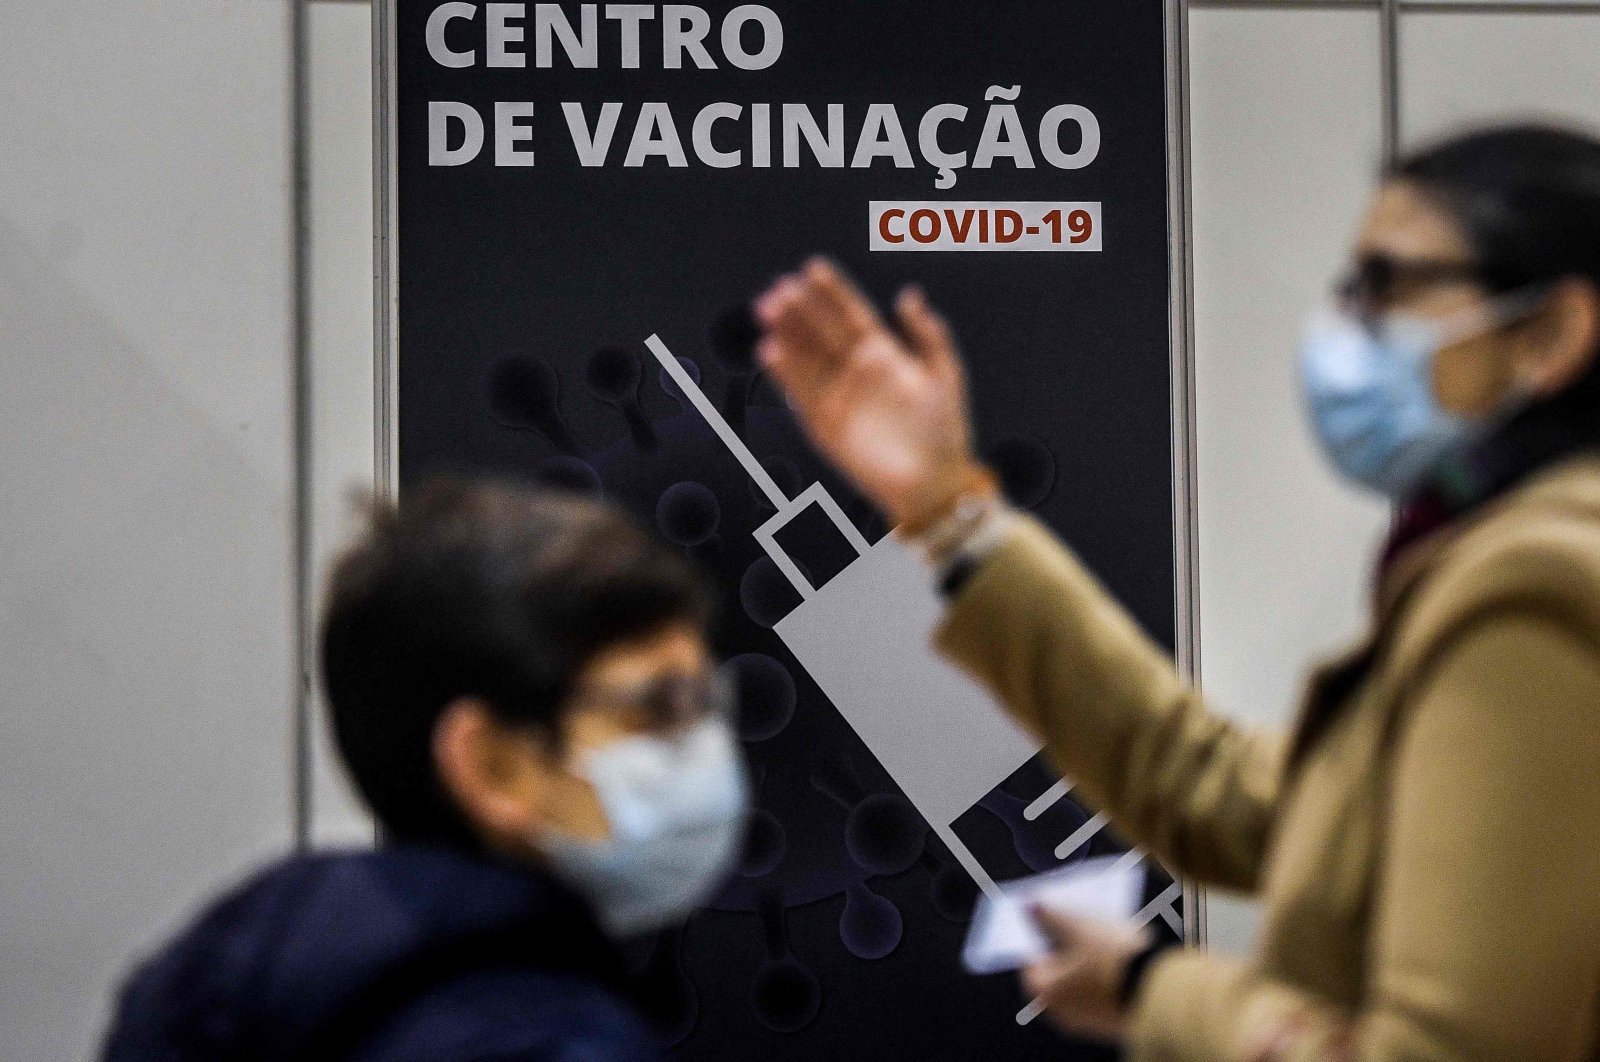 Children accompanied by their parents wait to receive a dose of the COVID-19 vaccine at the vaccination center of Parque das Nacoes in Lisbon on Dec. 18, 2021. (AFP Photo)